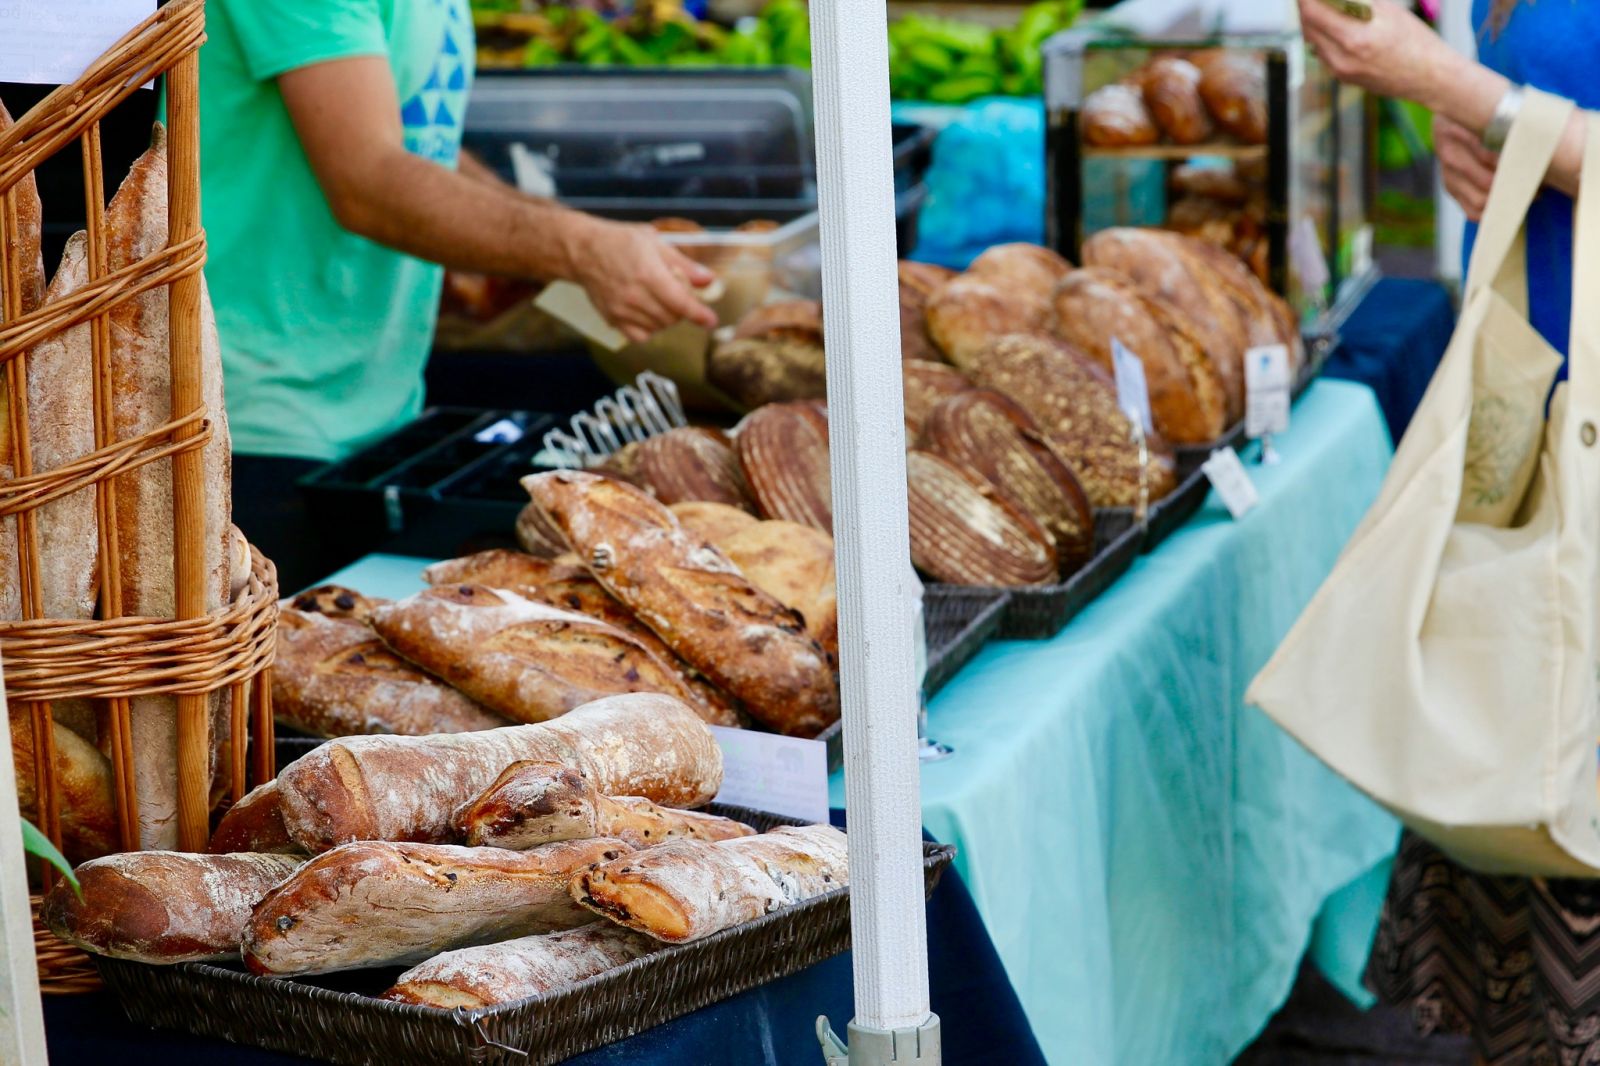 People shopping for fresh bread at a farmers market